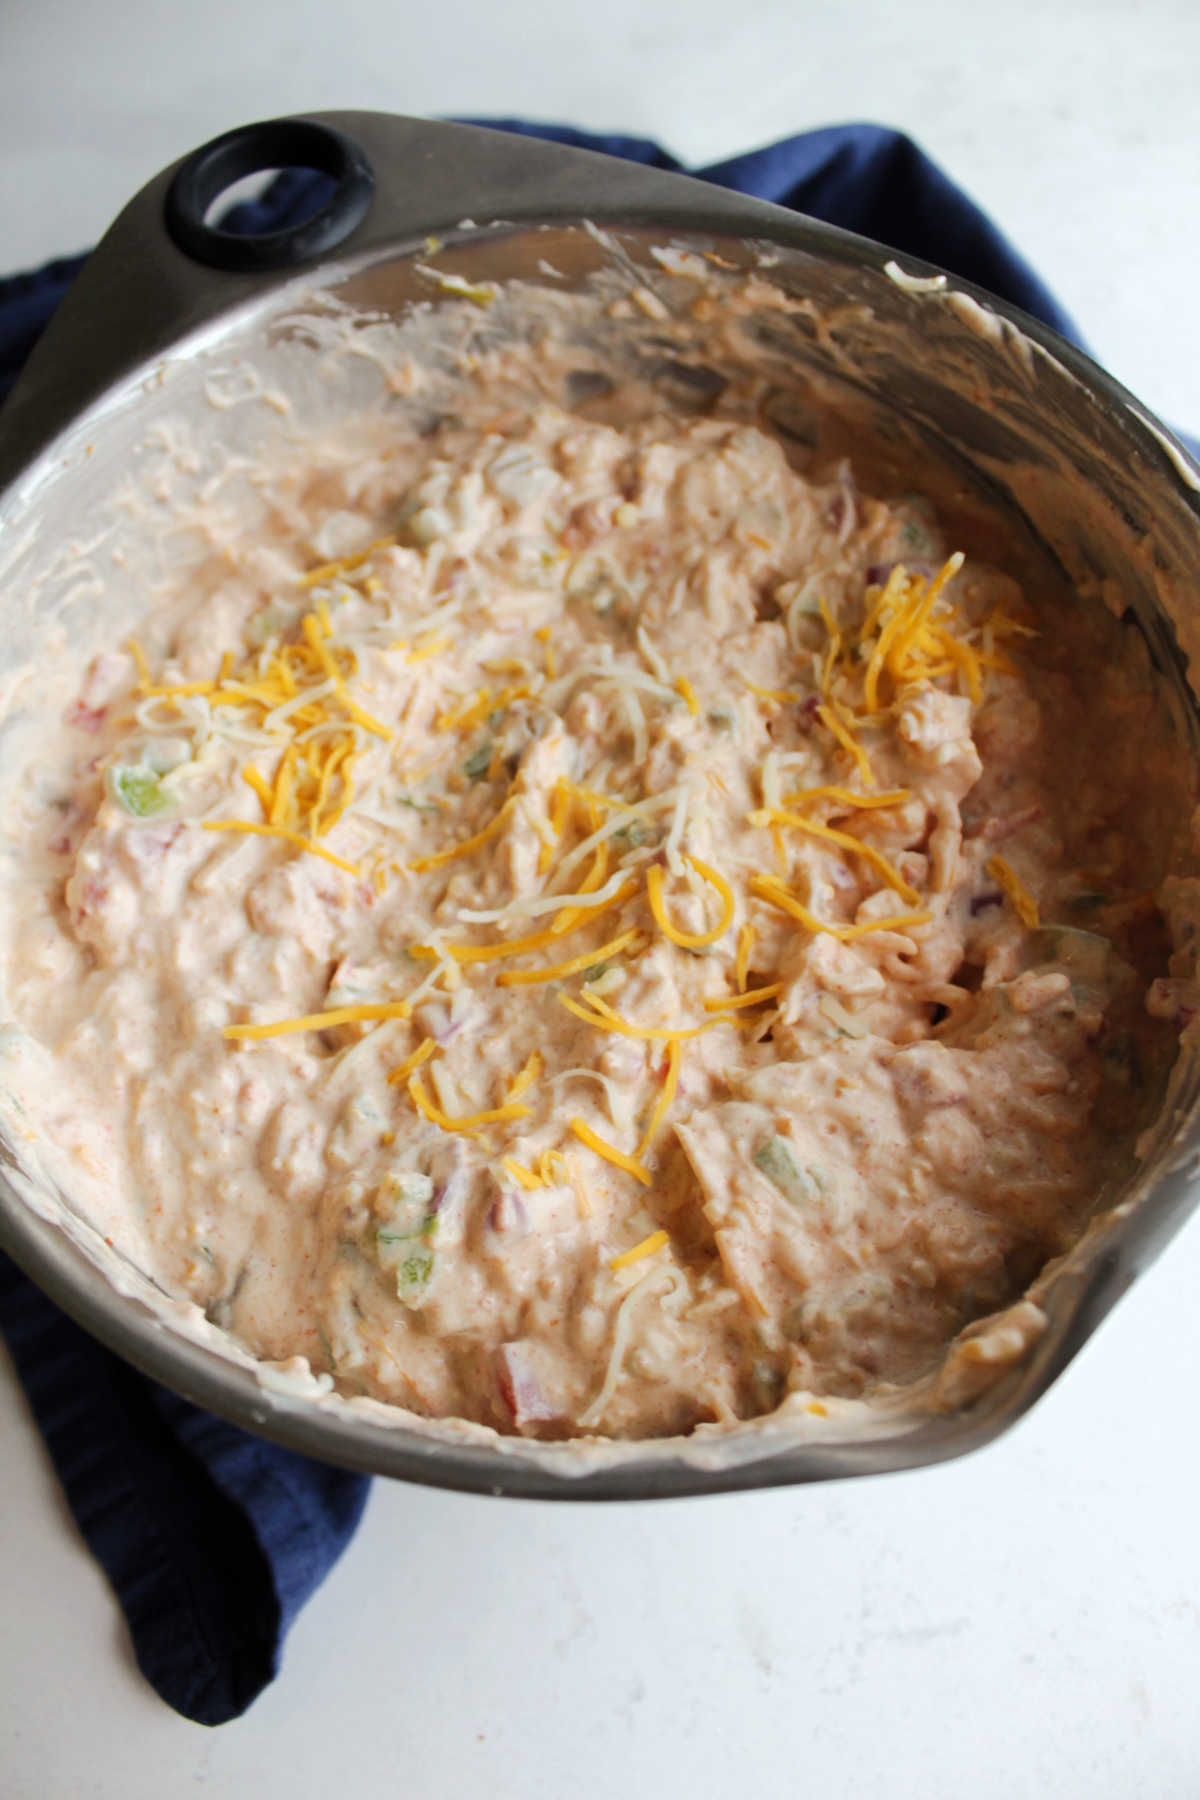 Adding shredded cheese to dip in large mixing bowl.